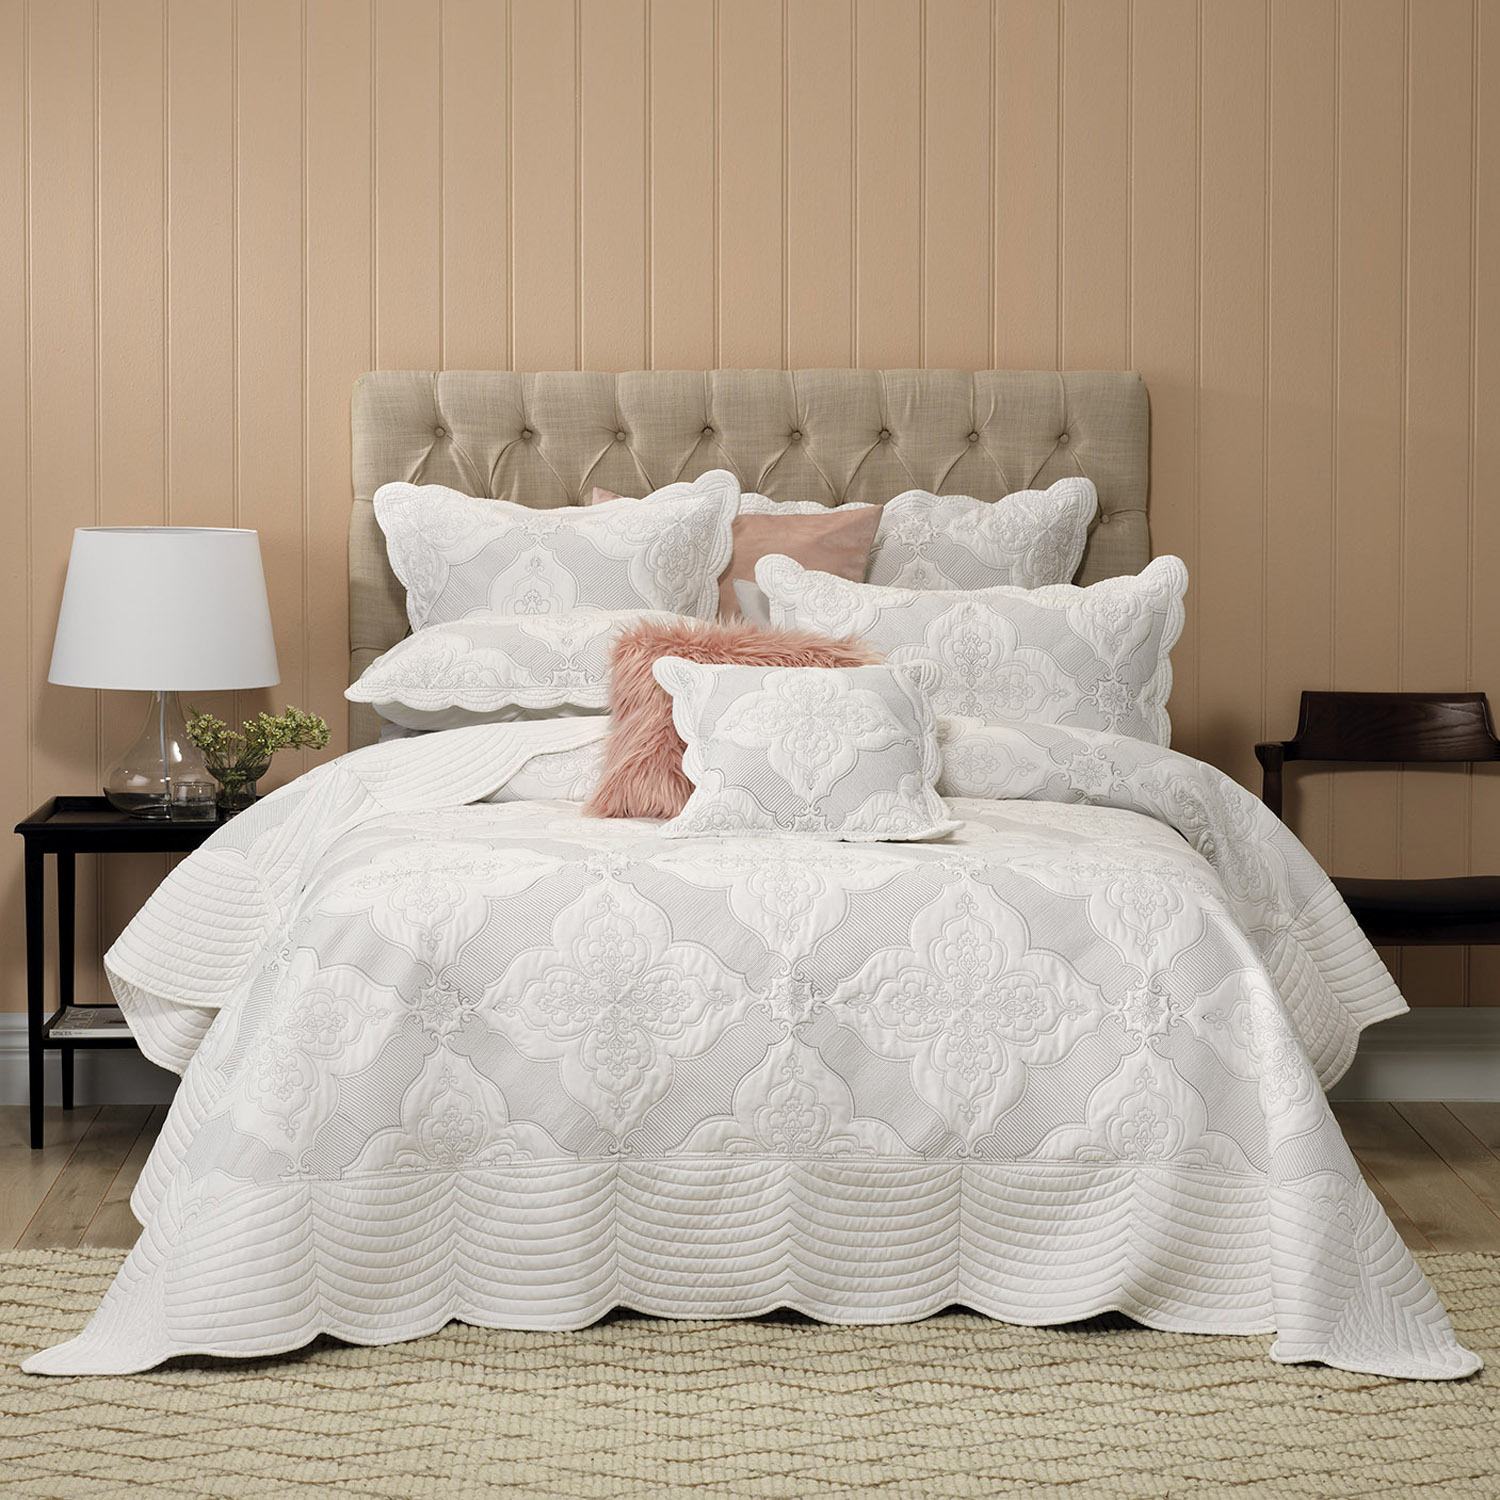 New Modern Quality INSPIRATION Quilted Beautiful Bedspread/Throw with 2 Pillow Shams White, Double 